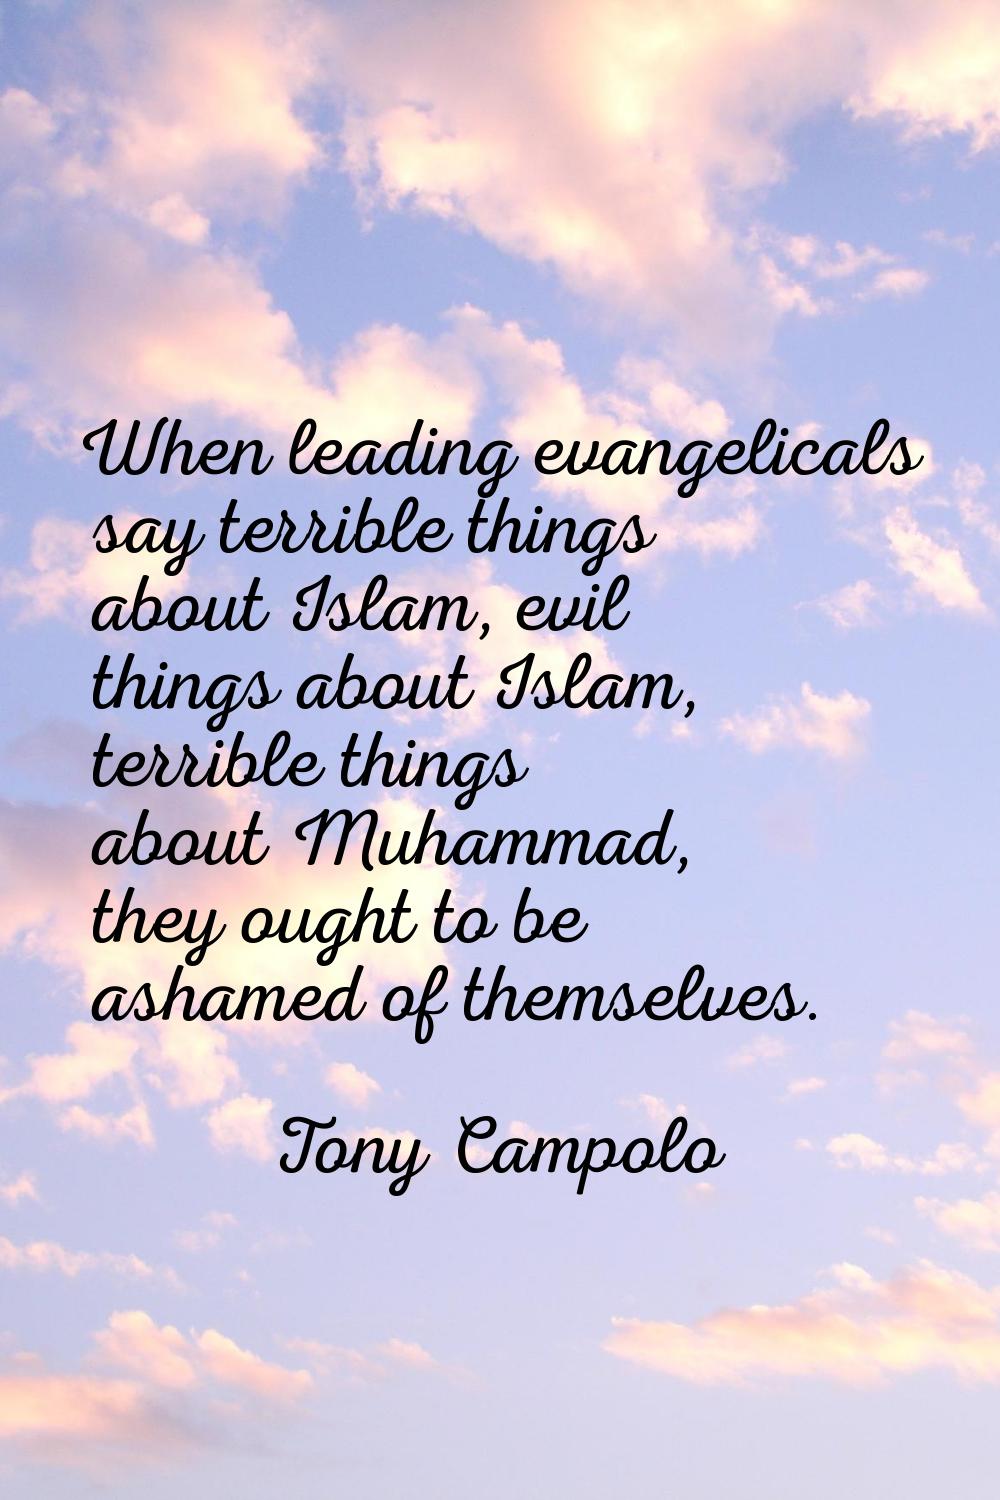 When leading evangelicals say terrible things about Islam, evil things about Islam, terrible things